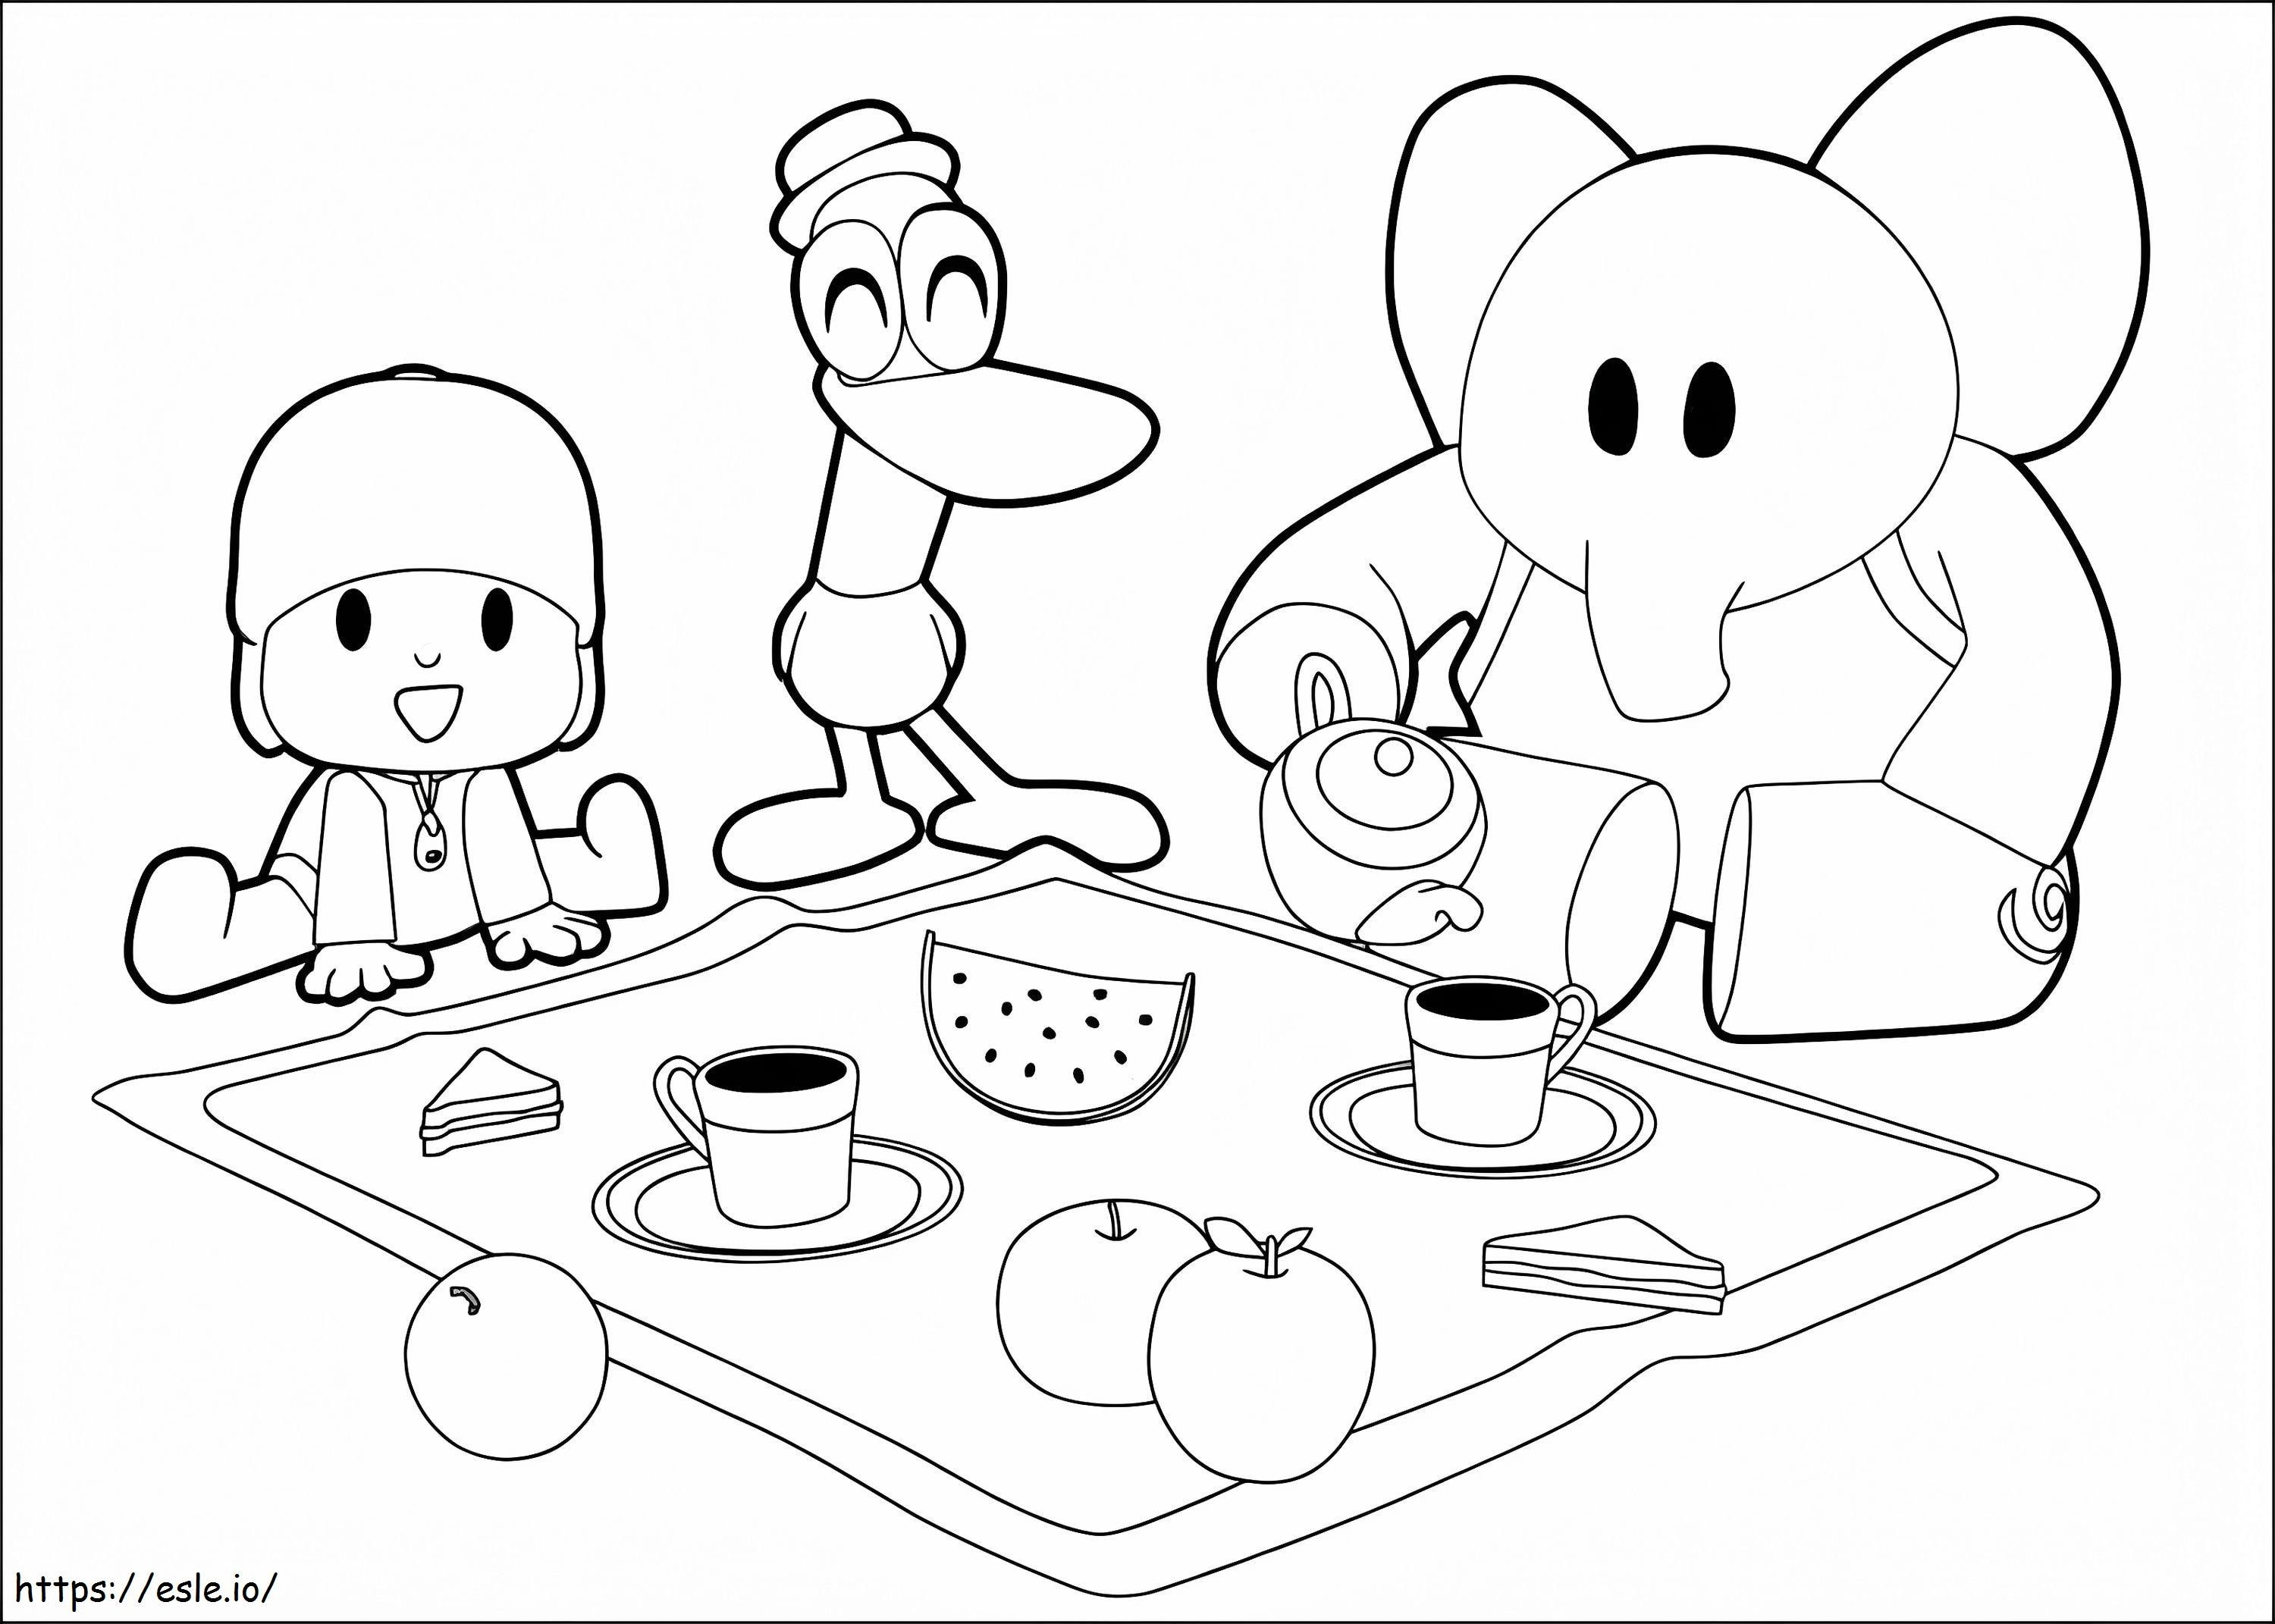 Picnic With Pocoyo coloring page